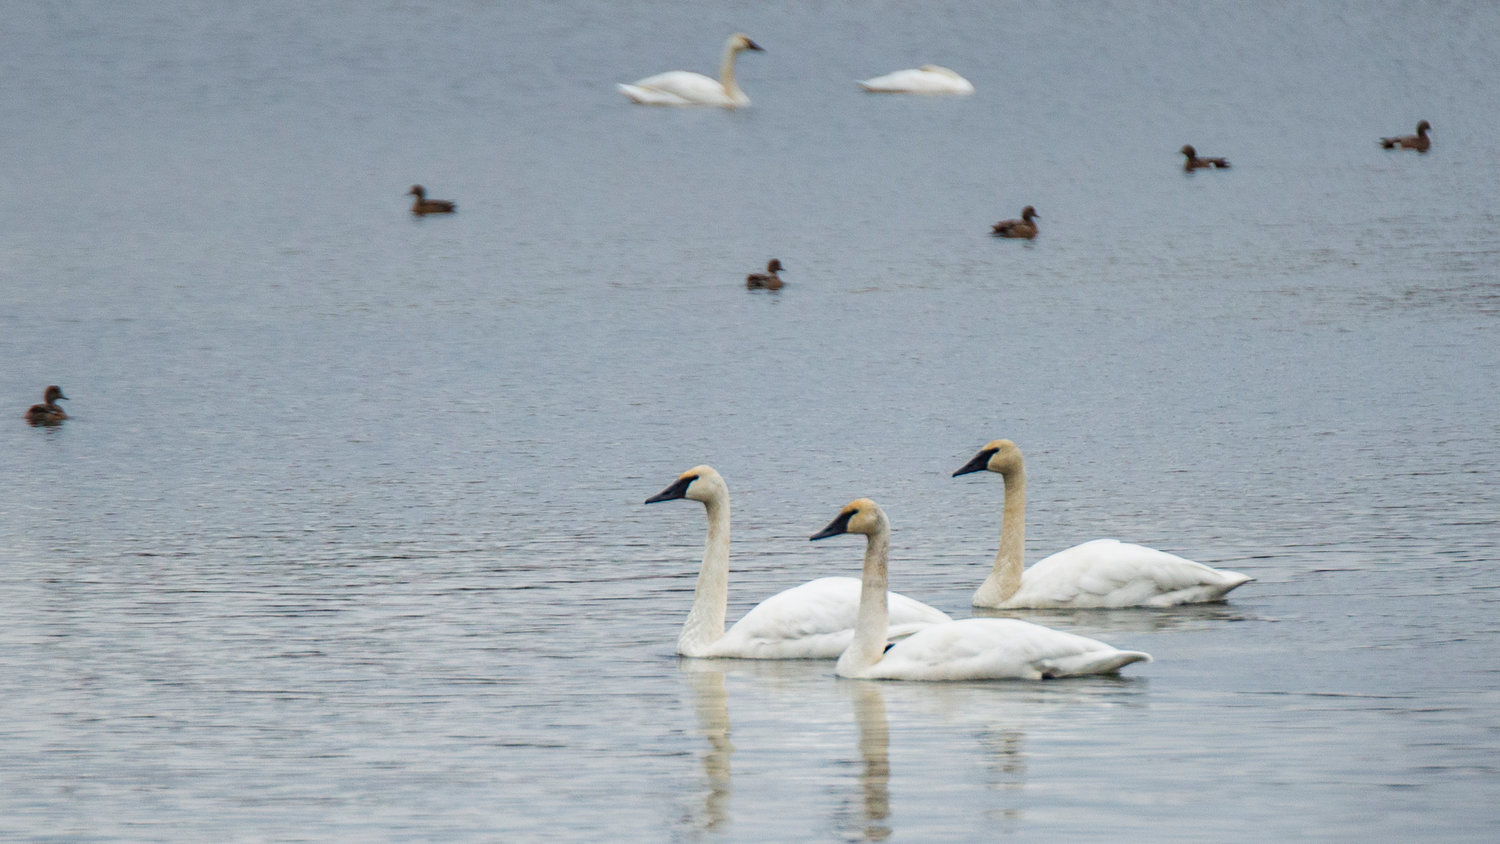 Trumpeter swans float leisurely on a pond with other waterfowl at the trailhead of the Willapa Hills Trail in Chehalis on Saturday afternoon.